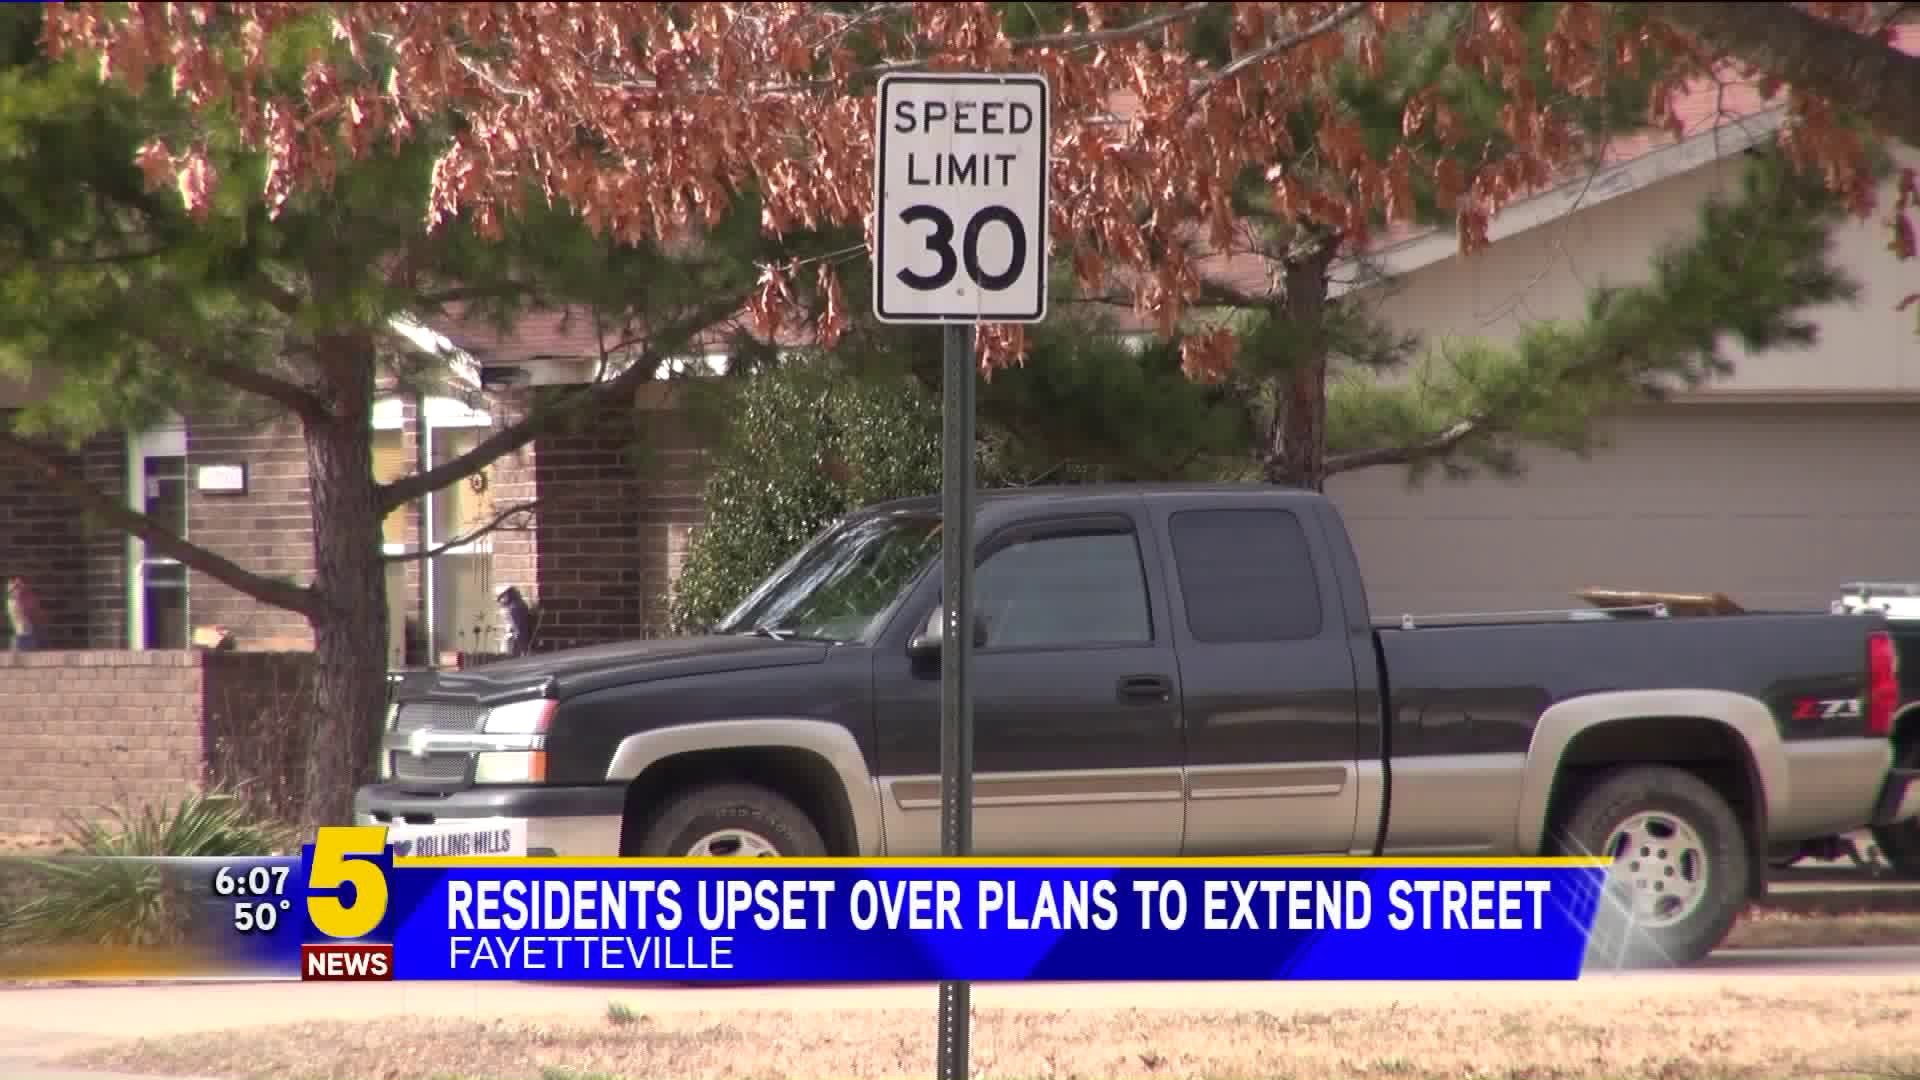 Residents Upset Over Plans To Extend Street